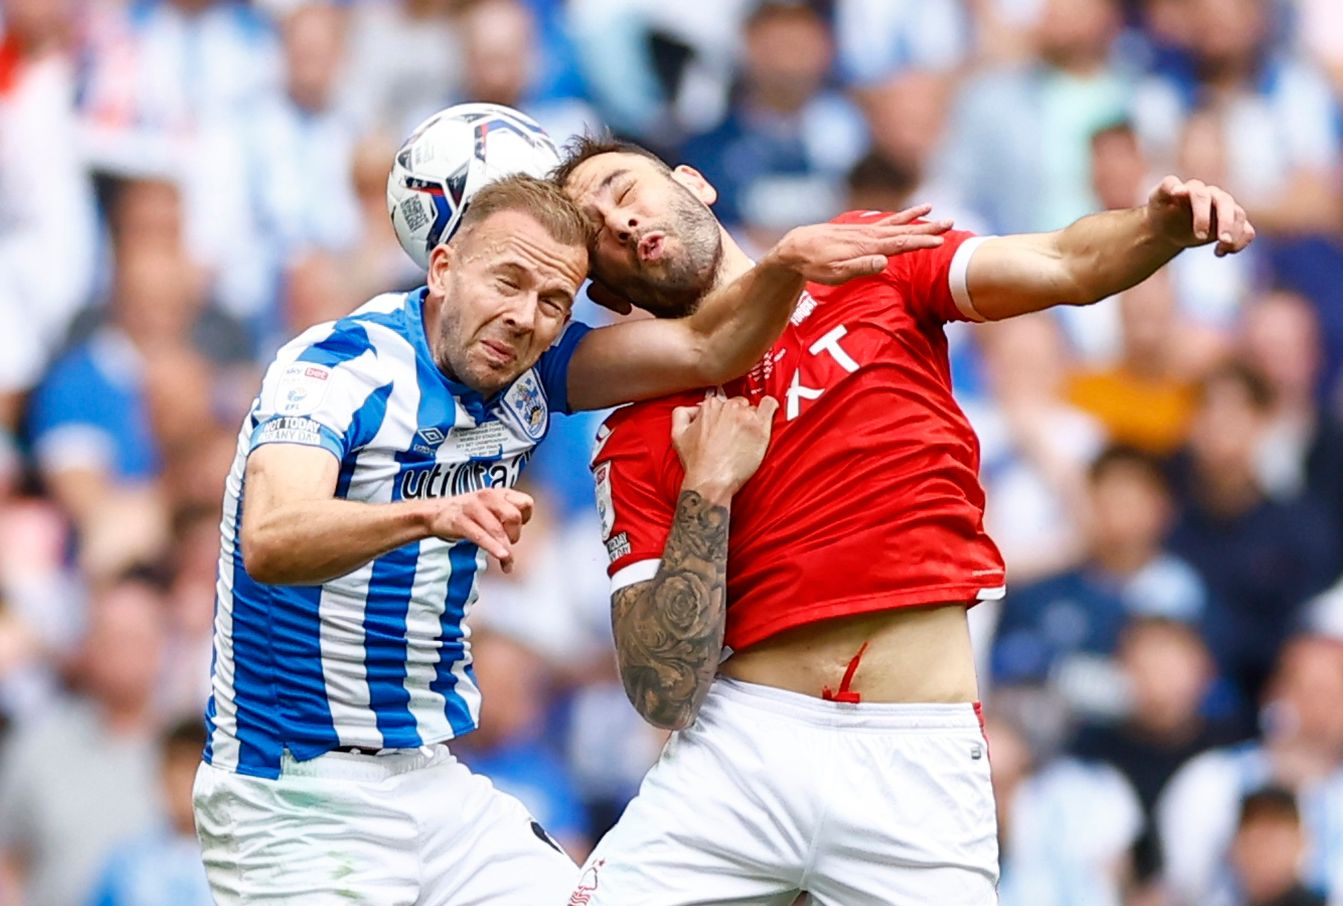 Soccer Football - Championship Play-Off Final - Huddersfield Town v Nottingham Forest - Wembley Stadium, London, Britain - May 29, 2022 Huddersfield Town's Jordan Rhodes in action with Nottingham Forest's Steve Cook Action Images via Reuters/Andrew Boyers